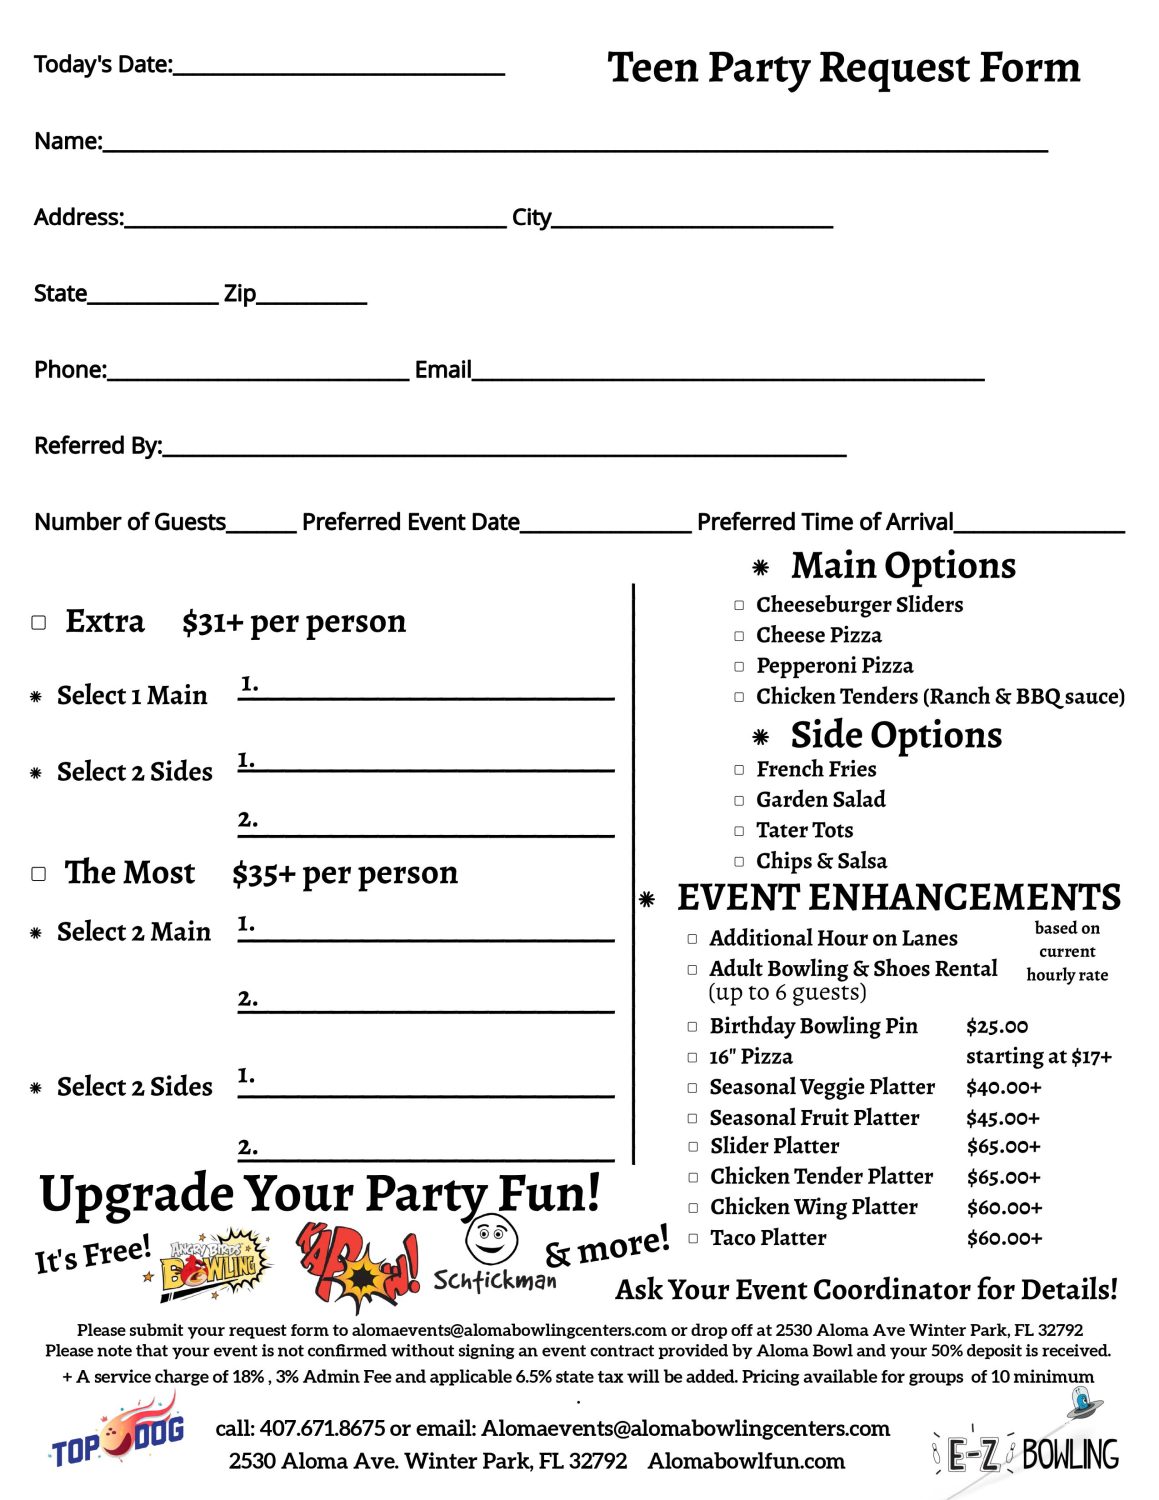 Teen Party Request Form